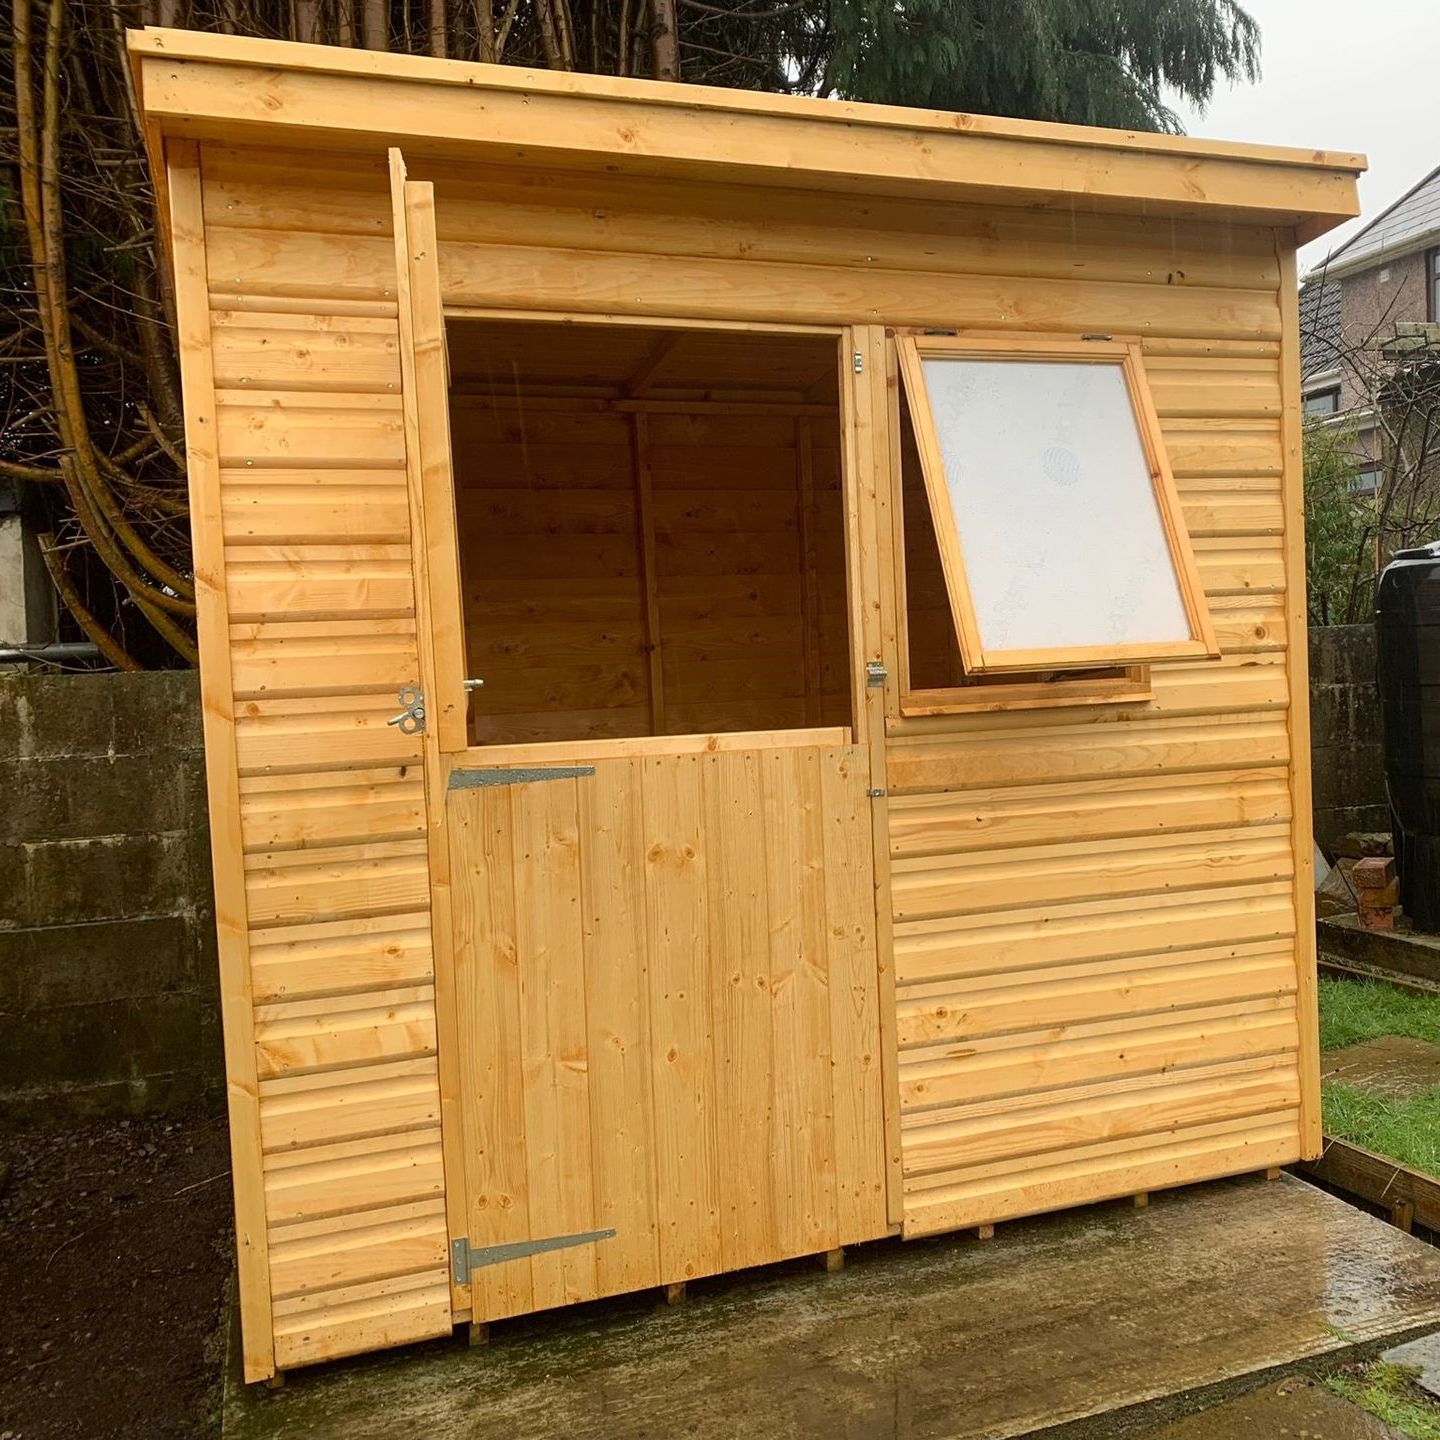 7' x 5' Pent style shed with stable door and an opening window. To be used as a potting shed would you believe.